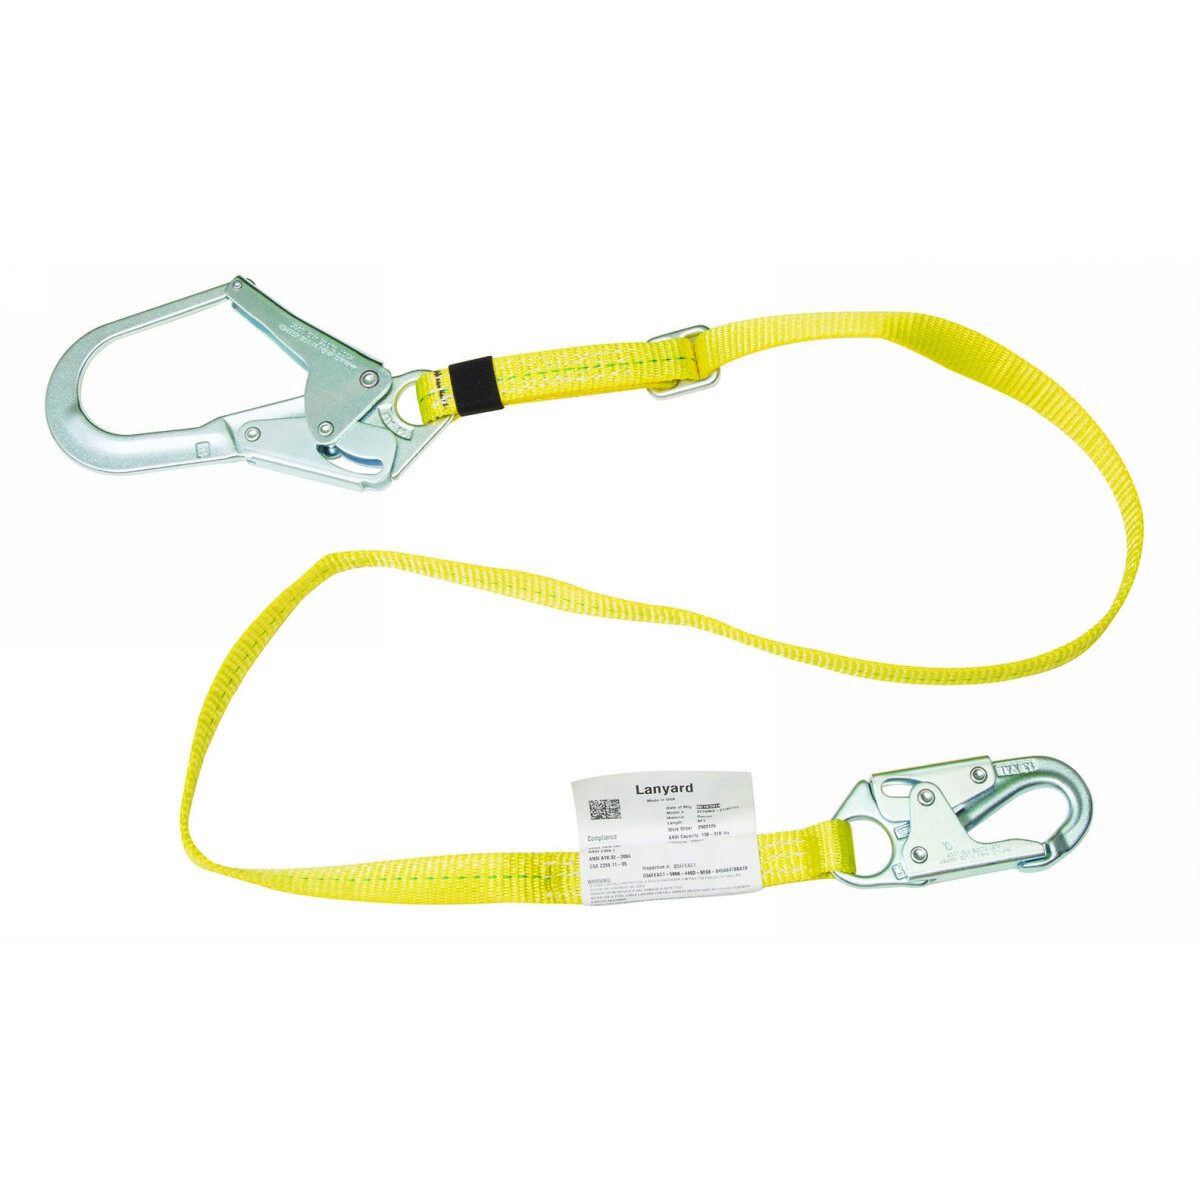 Honeywell Miller® 6' Web Positioning Lanyard With Locking Snap Hook Harness Connector